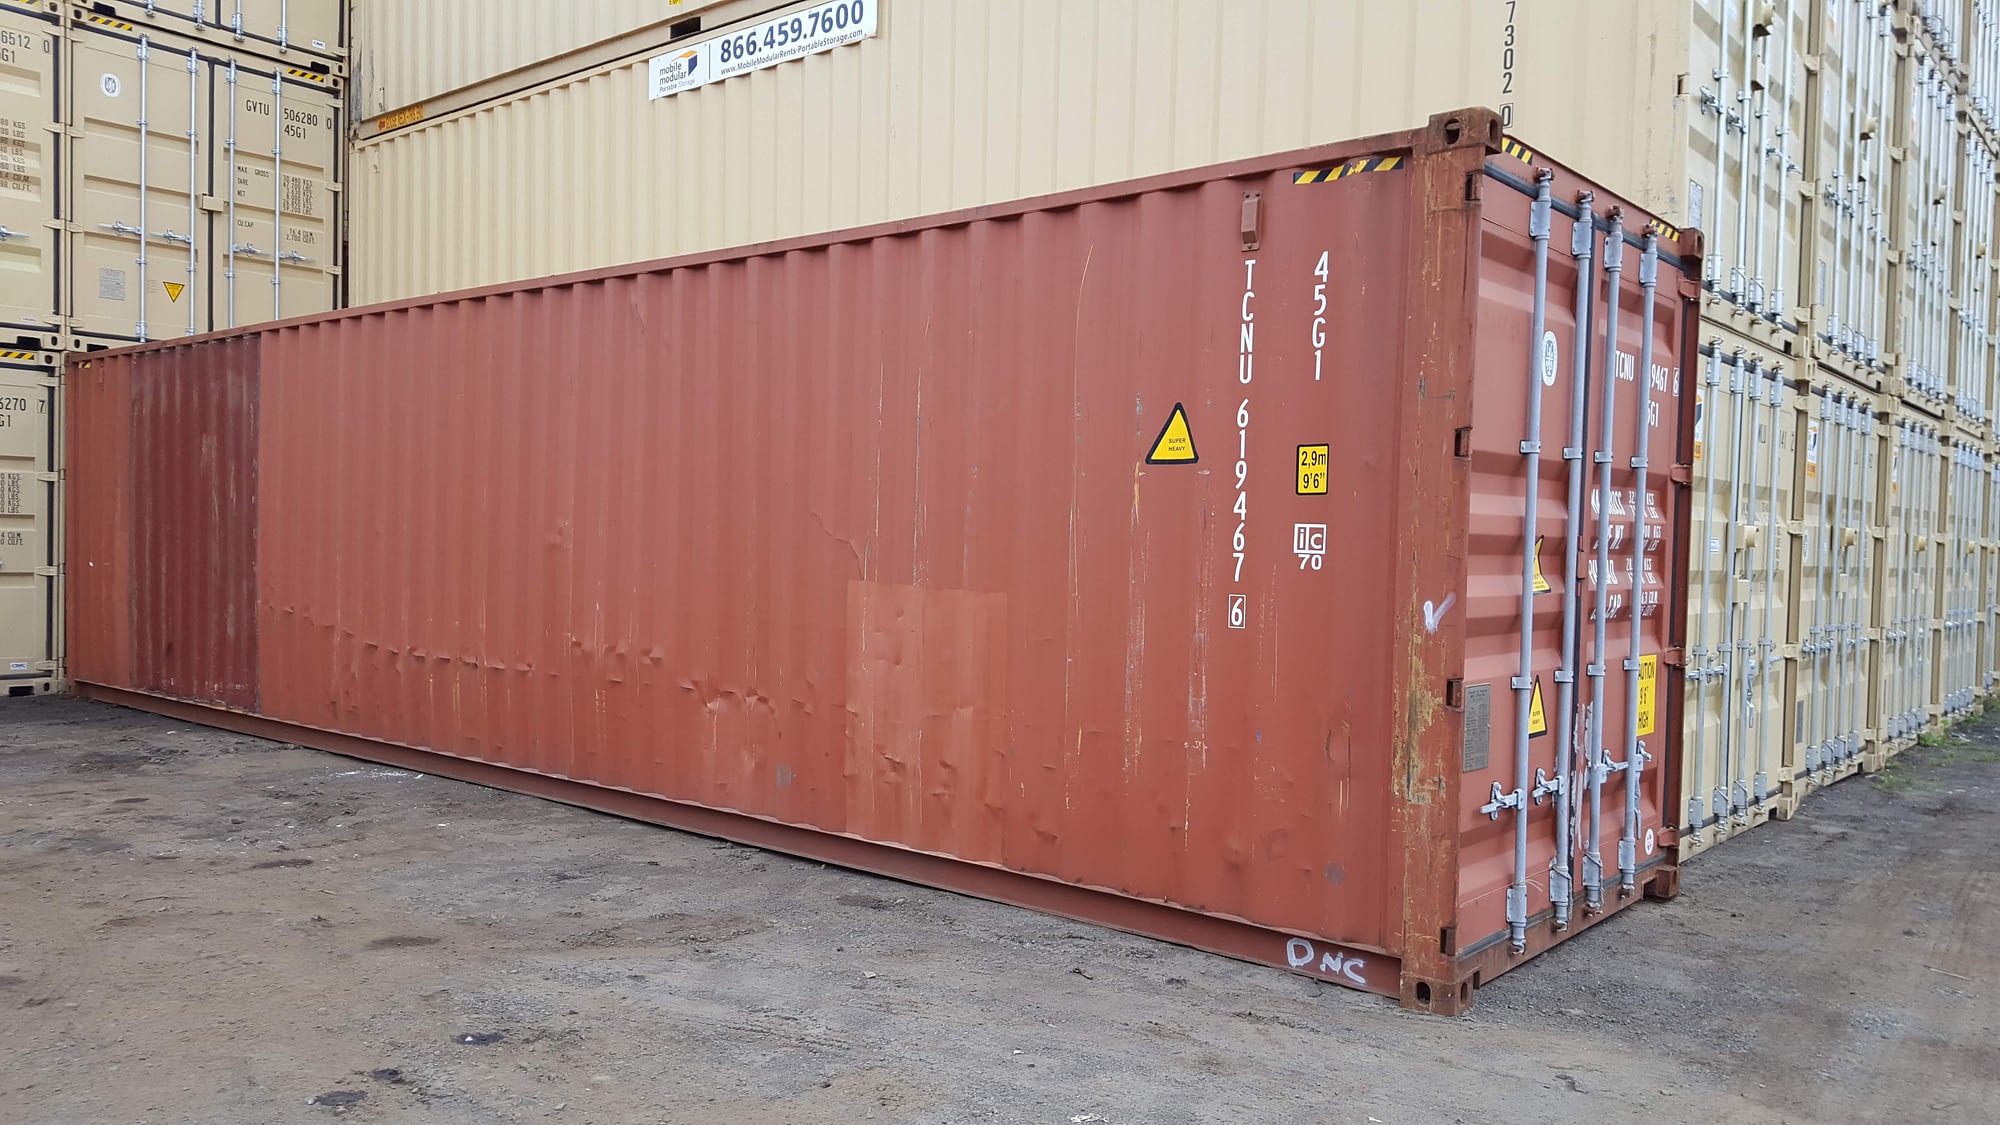 TRS Containers sells rents and modifies steel shipping and storage containers for export or domestic storage